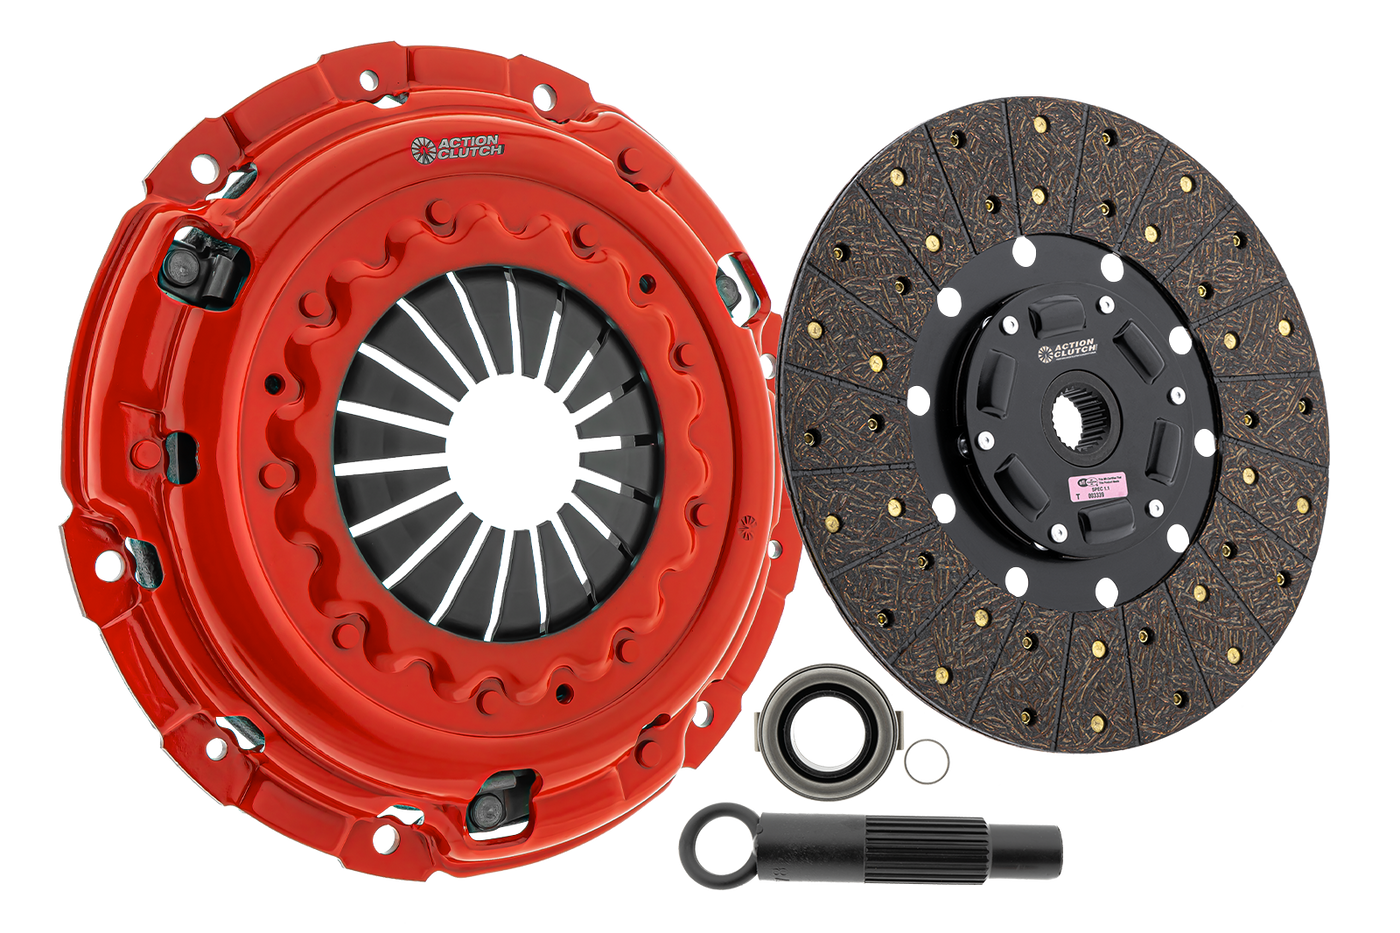 Stage 1 Clutch Kit (1OS) for Ford Mustang GT 1996-2004 4.6L SOHC (Modular)